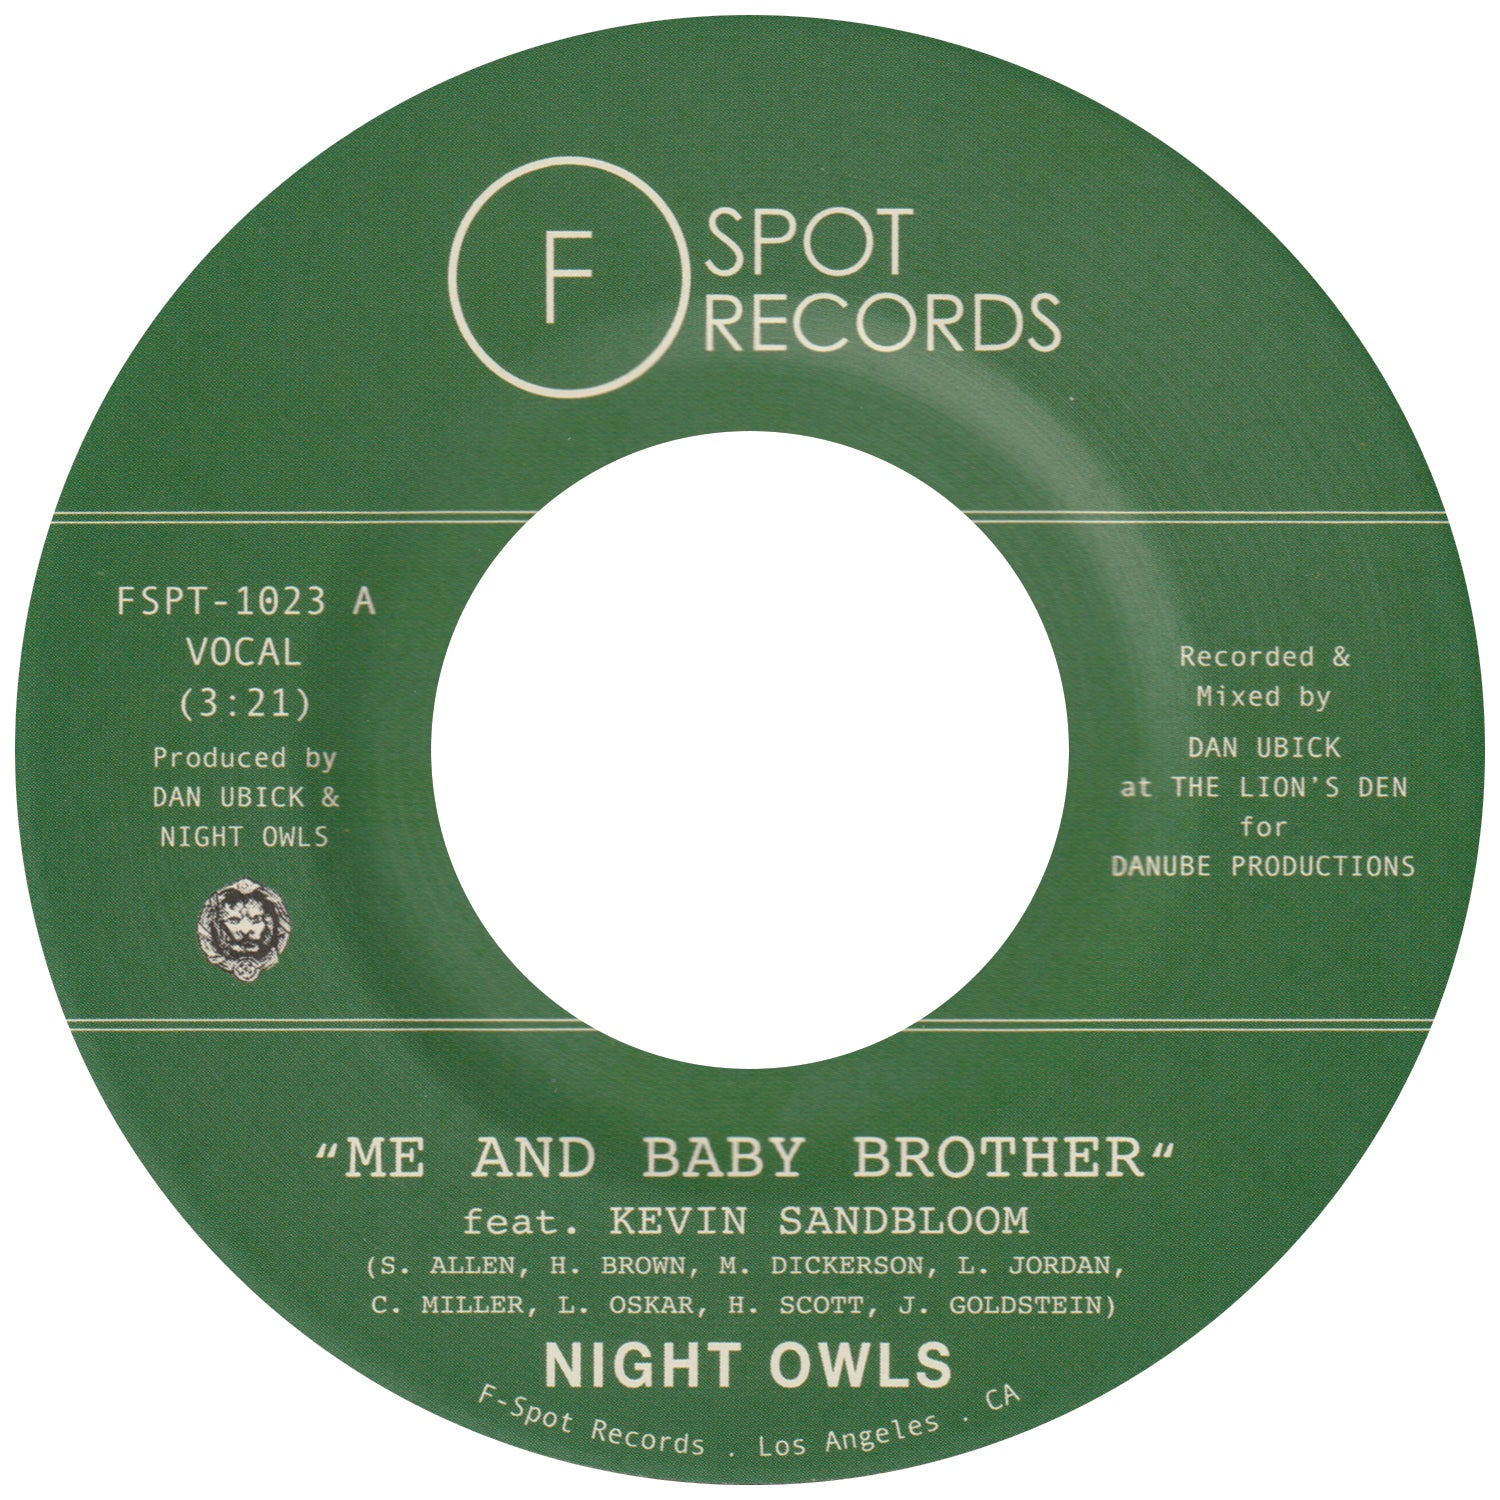 NIGHT OWLS - Me And Baby Brother (feat. Kevin Sandbloom) b/w School Girl Crush (feat. Kendra Morris)